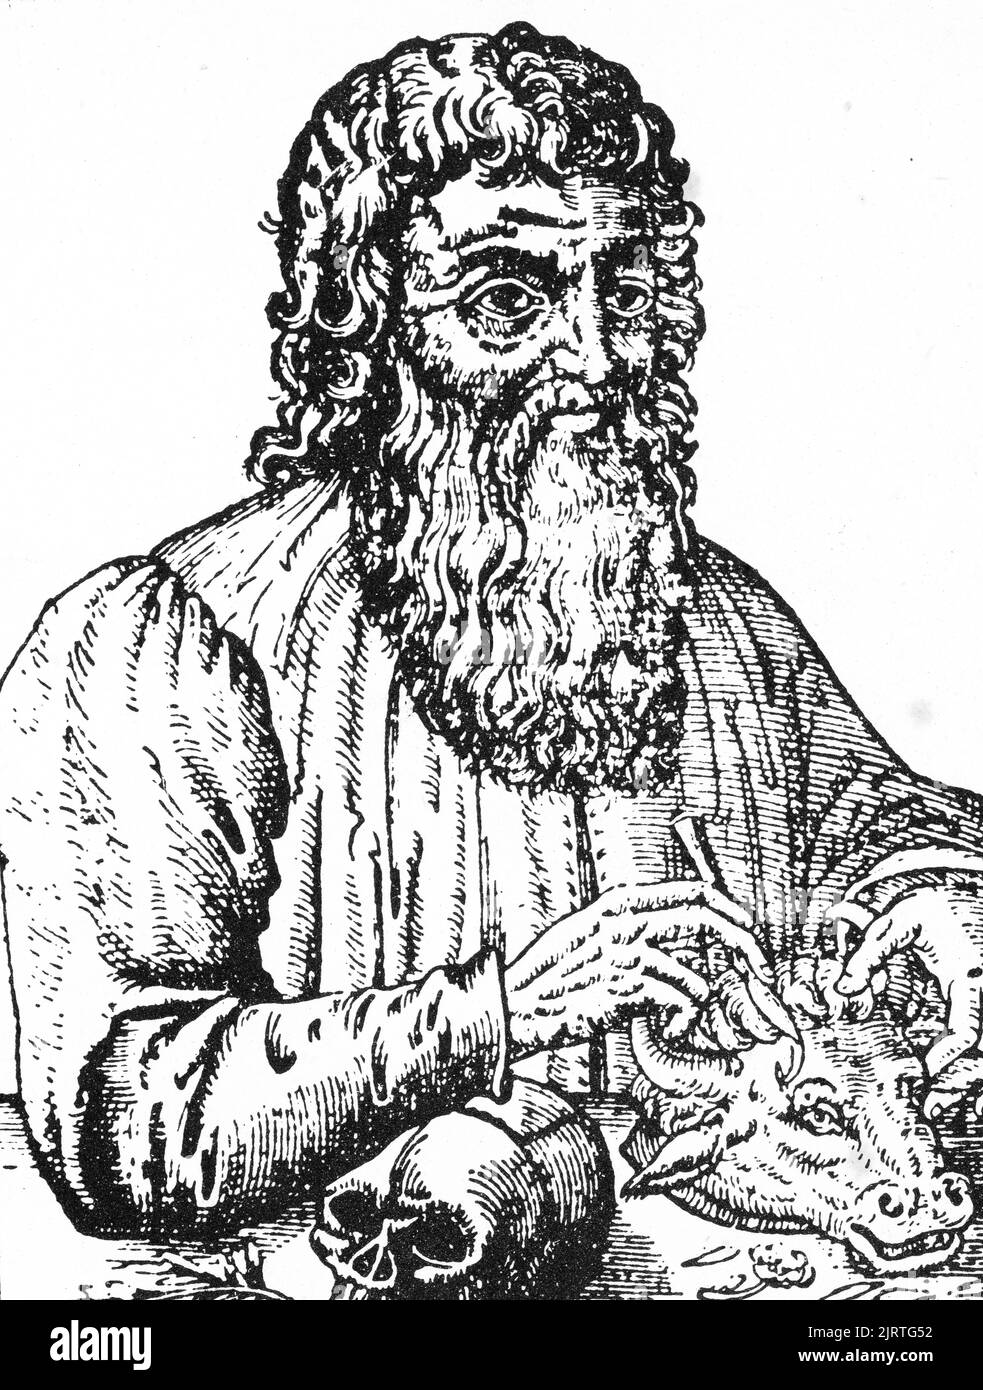 Hippocrates of Kos (c460-c370 BC), 1582. Hippocrates of Kos (c460-c370 BC), also known as Hippocrates II, Greek physician of the classical period. Considered one of the most outstanding figures in the history of medicine, he is often referred to as the 'Father of Medicine'. A woodcut from Ambroise Paré's Opera, 1582. Ambroise Paré (c1509-1590). Stock Photo